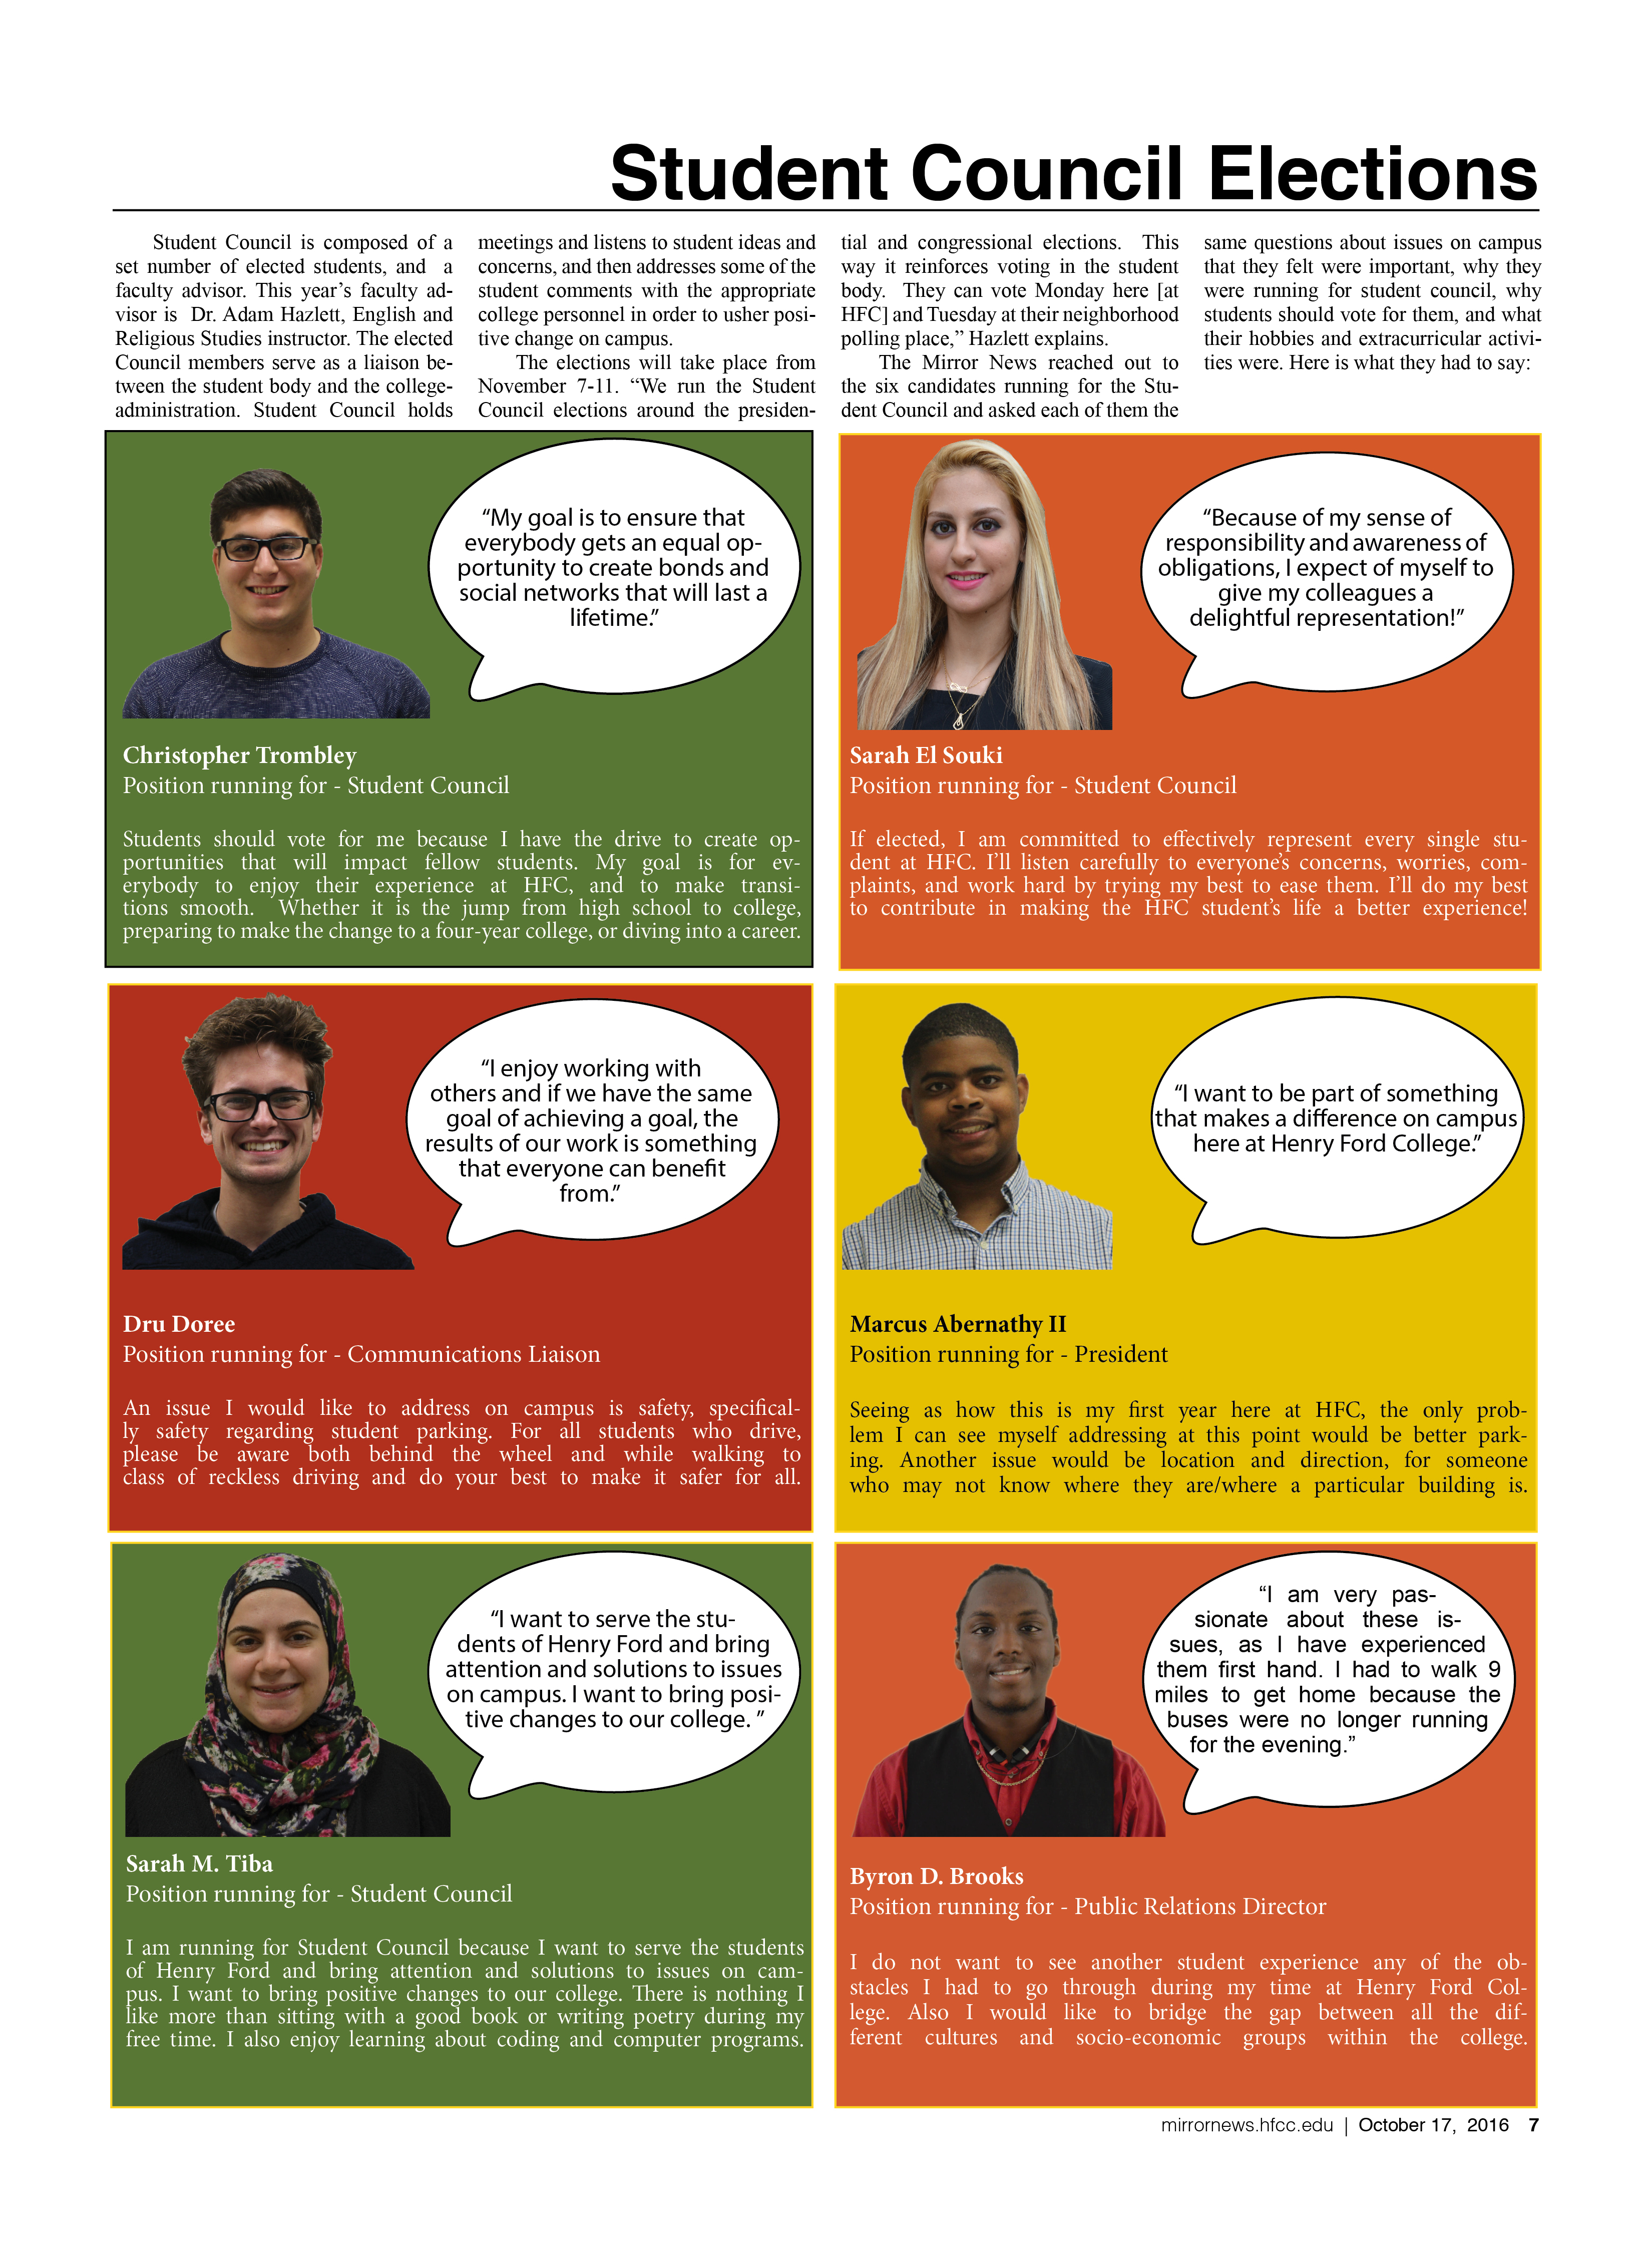 Photo of page 7 of Mirror News Volume 42 Issue 2 October 17, 2016 on the Student Council candidates 